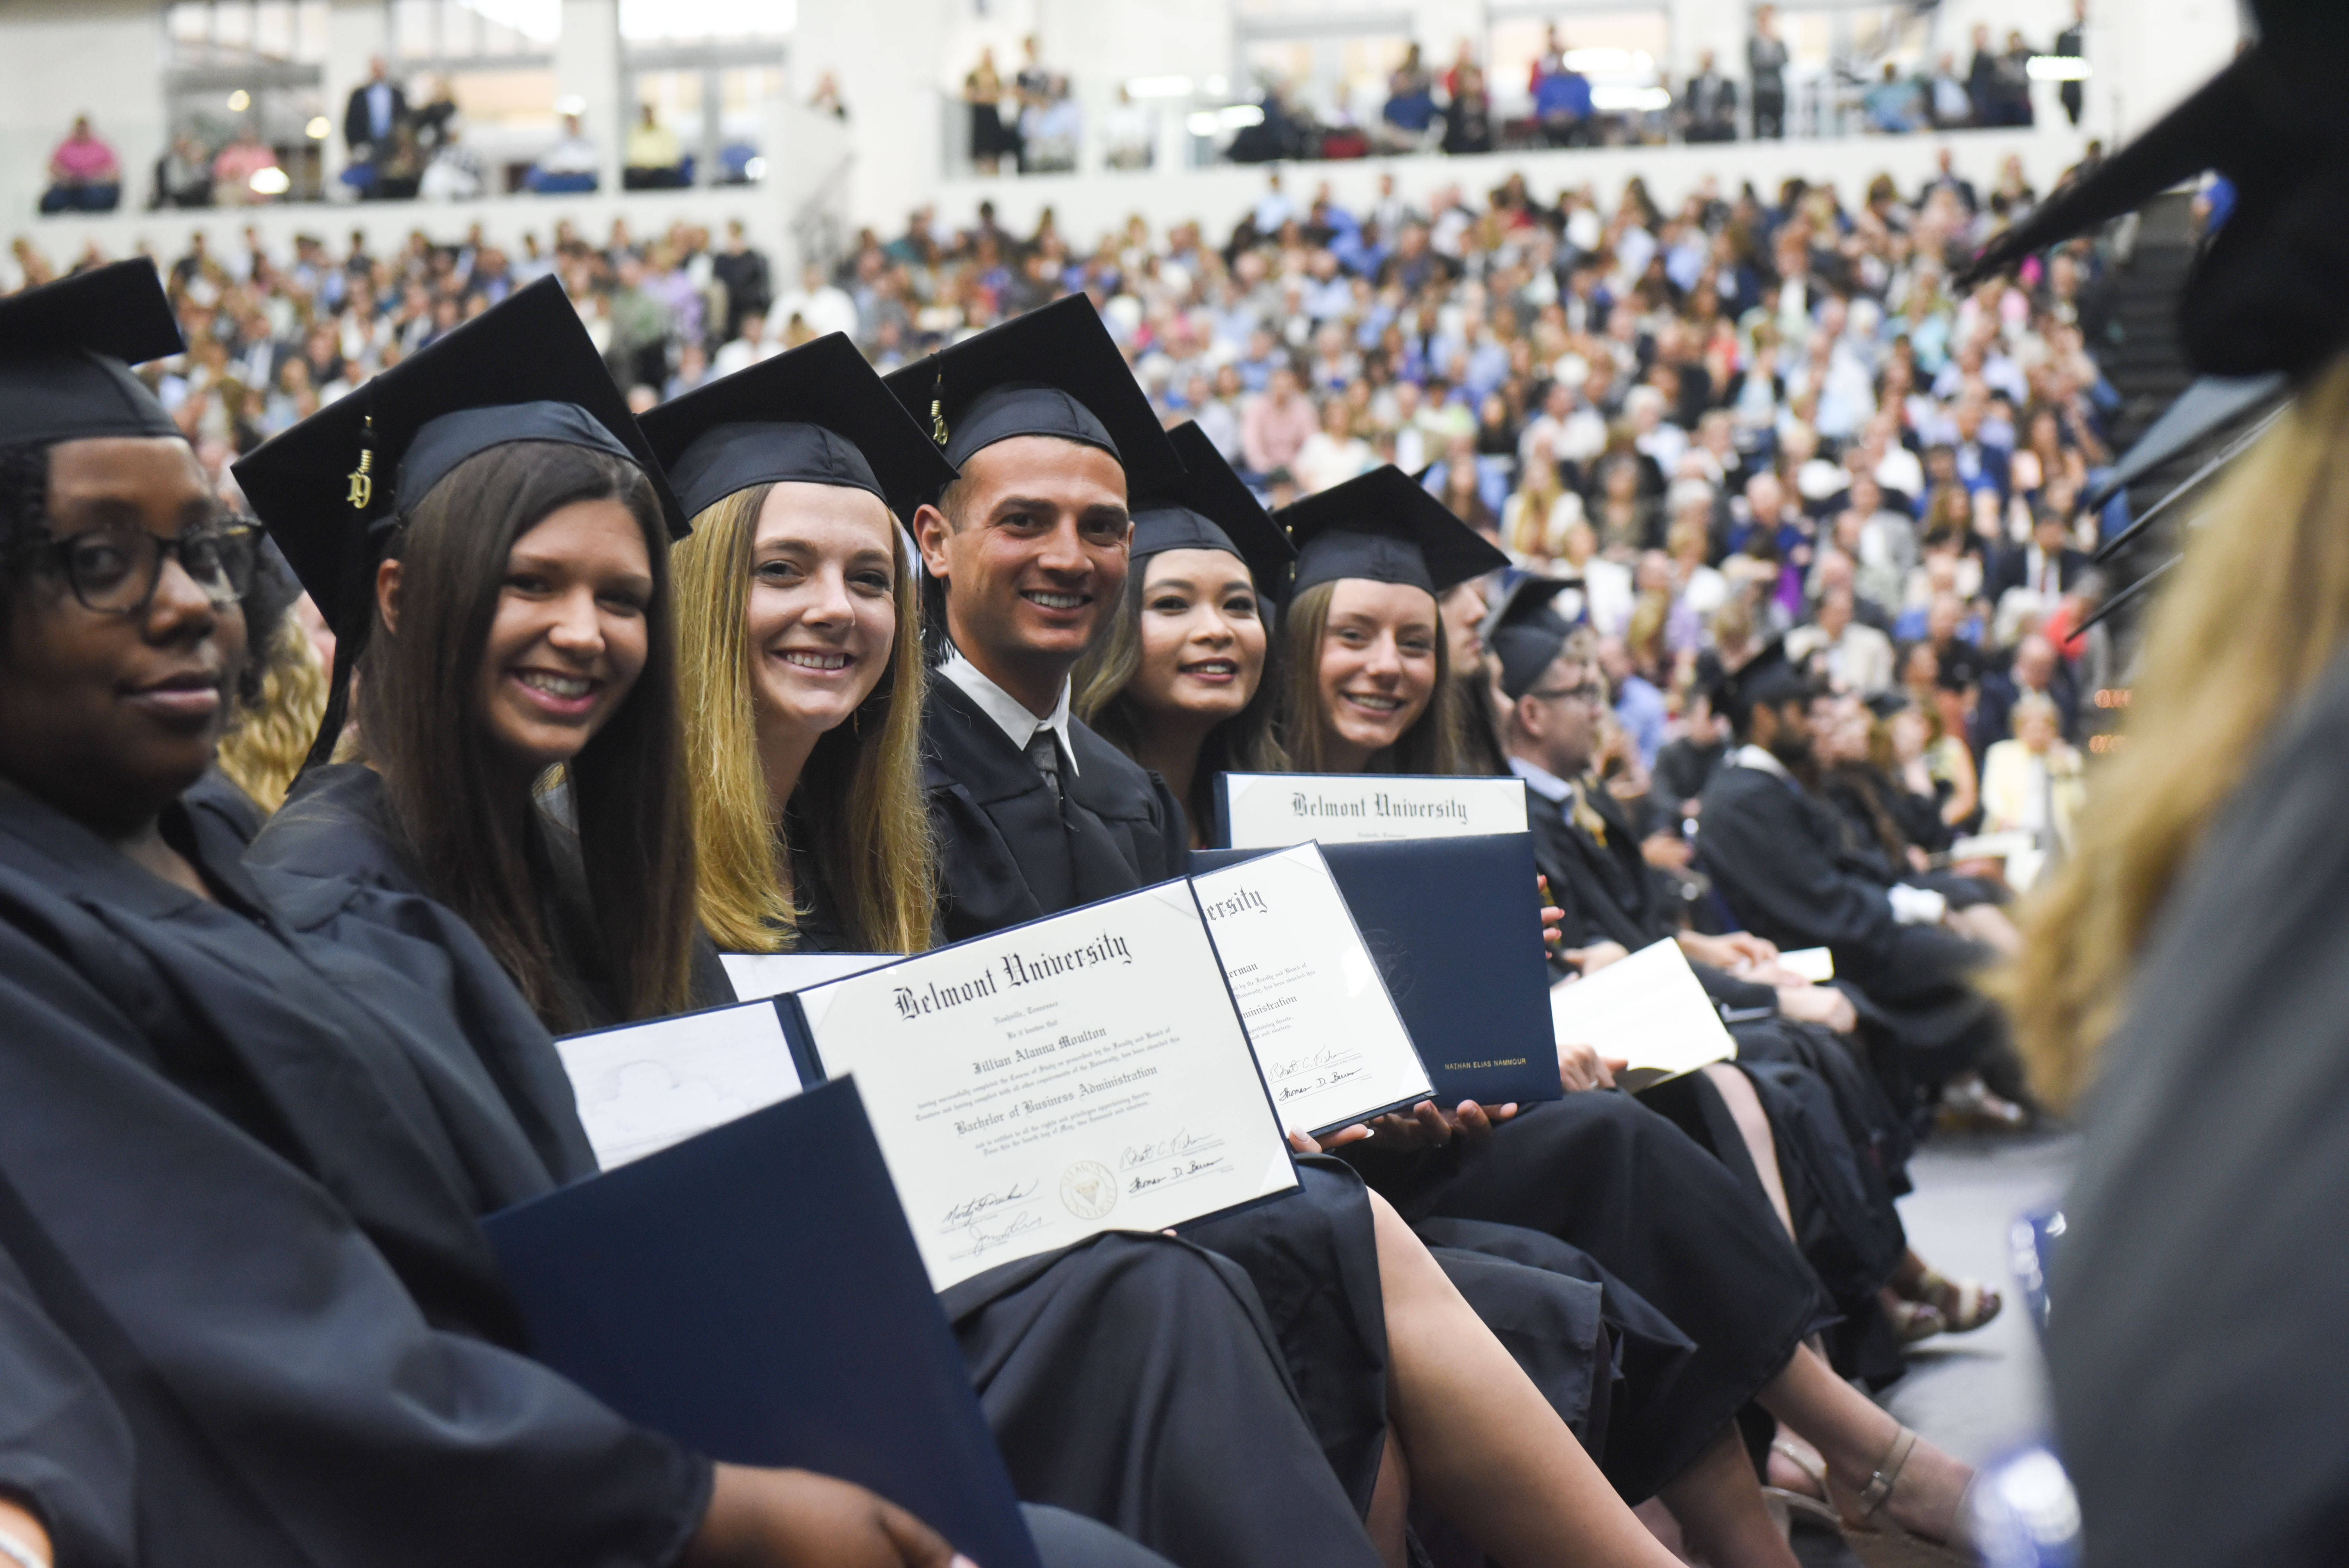 Belmont to Celebrate August Commencement Friday Belmont University